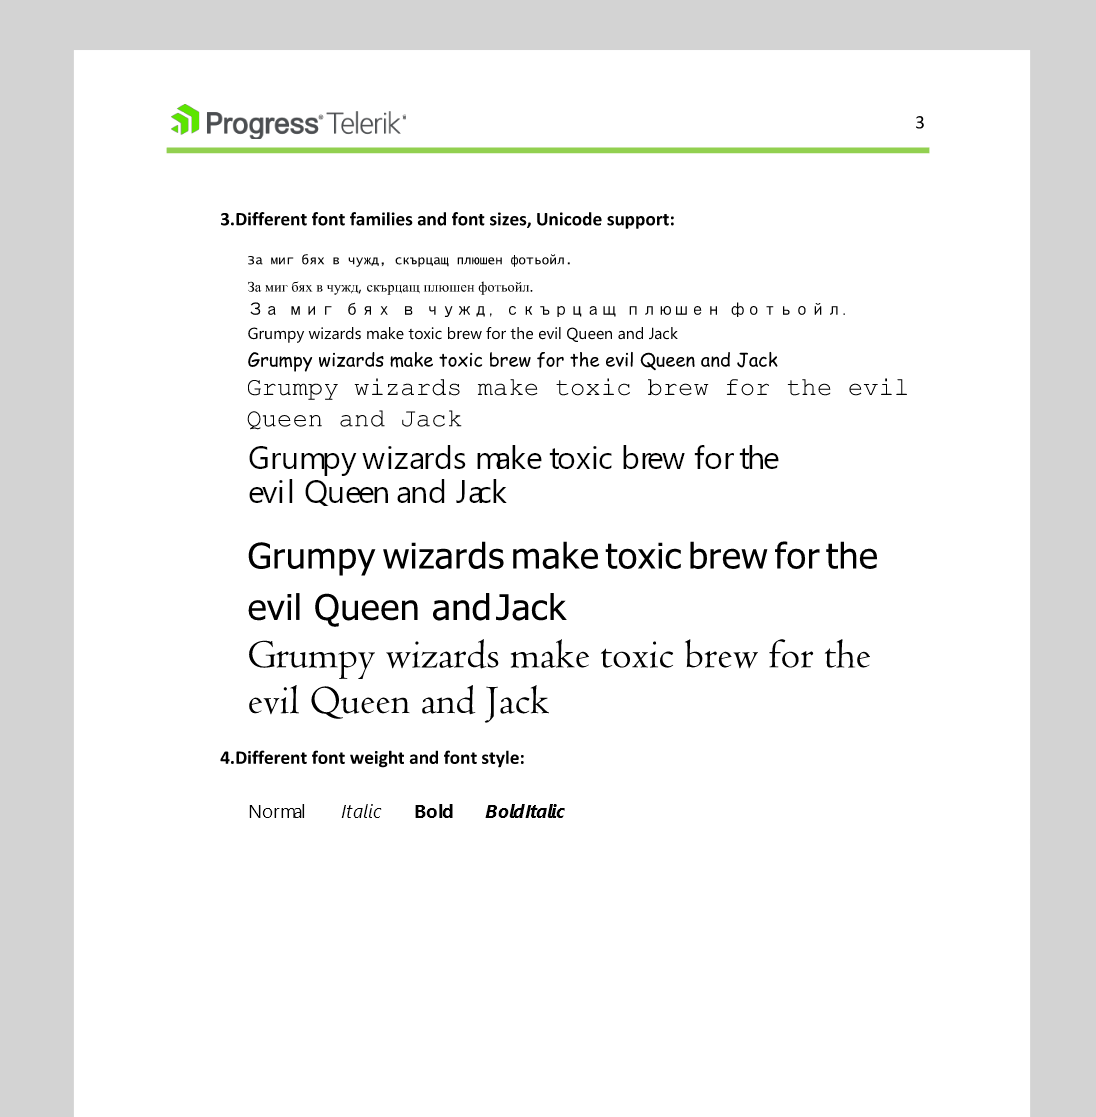 A PDF showing different font families and sizes